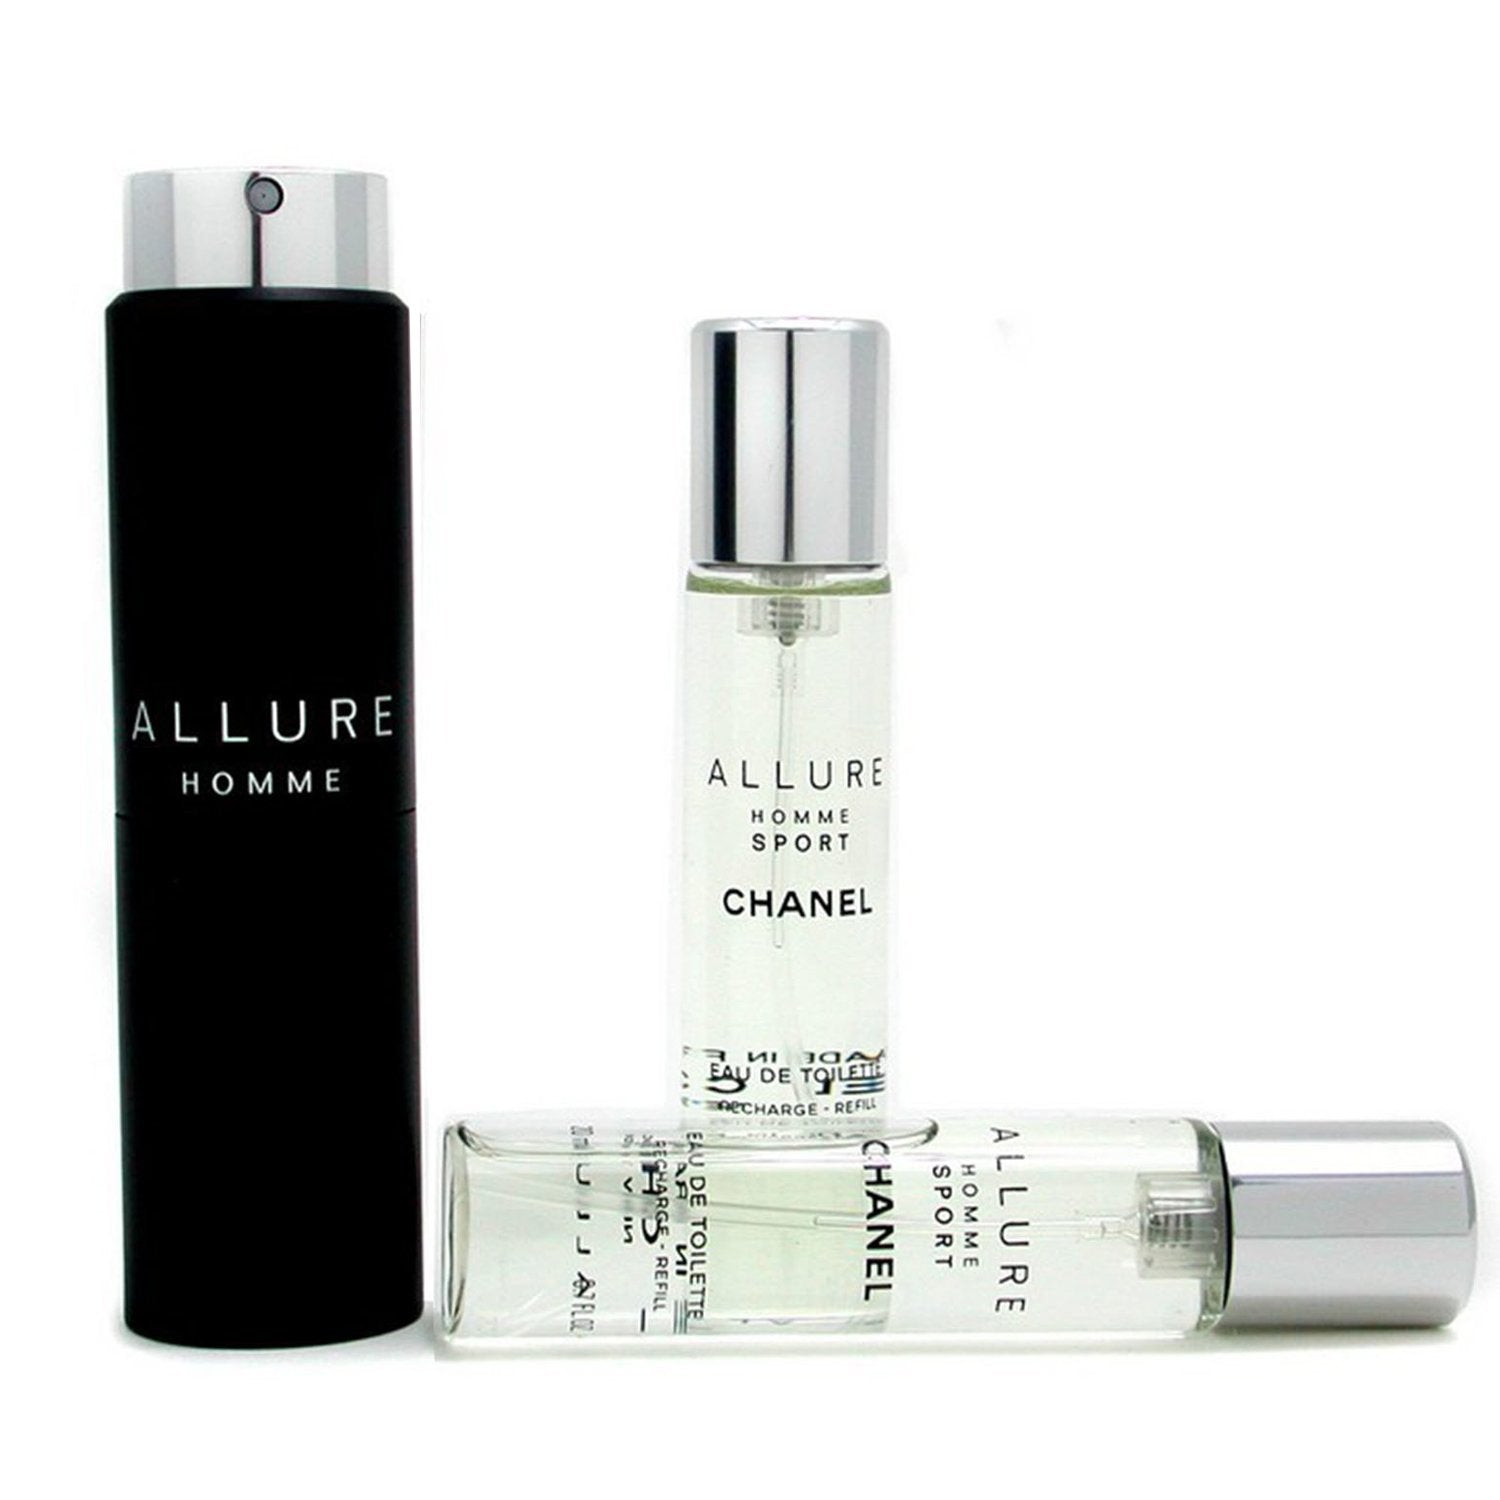 Chanel Allure Homme Sport Eau Extreme  Perfume adverts, Perfume ad,  Fragrance ad